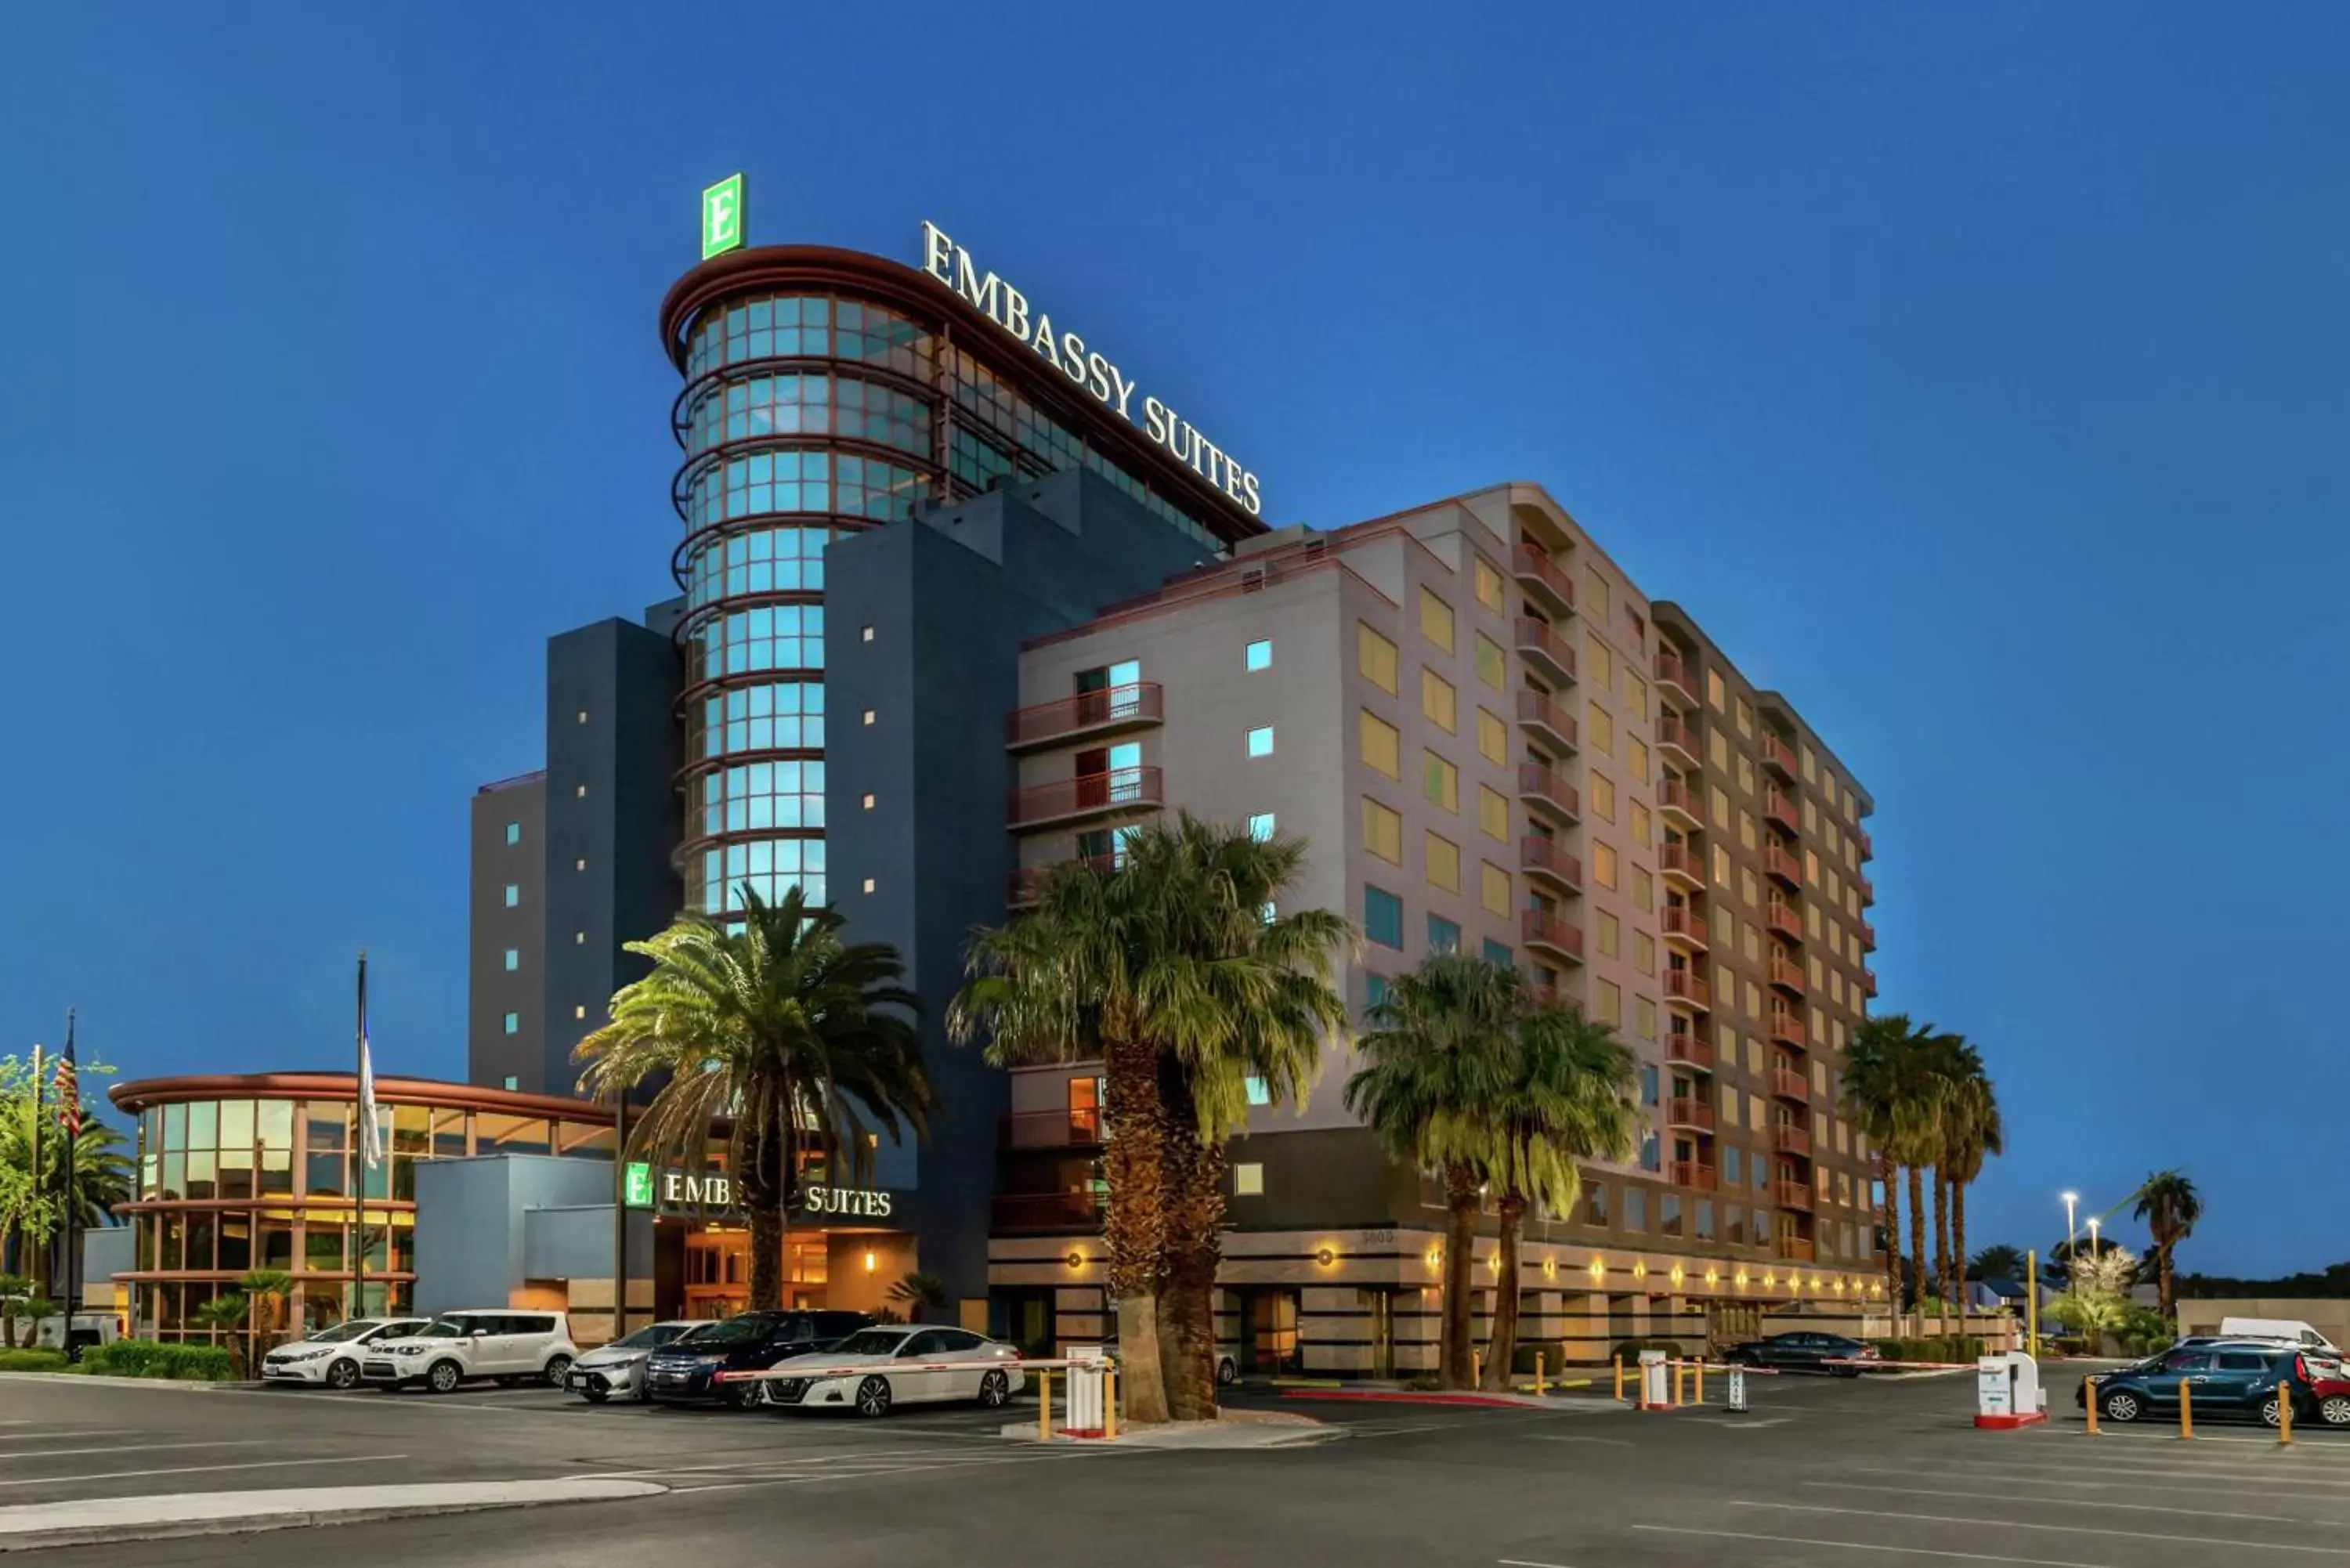 Property Building in Embassy Suites by Hilton Convention Center Las Vegas